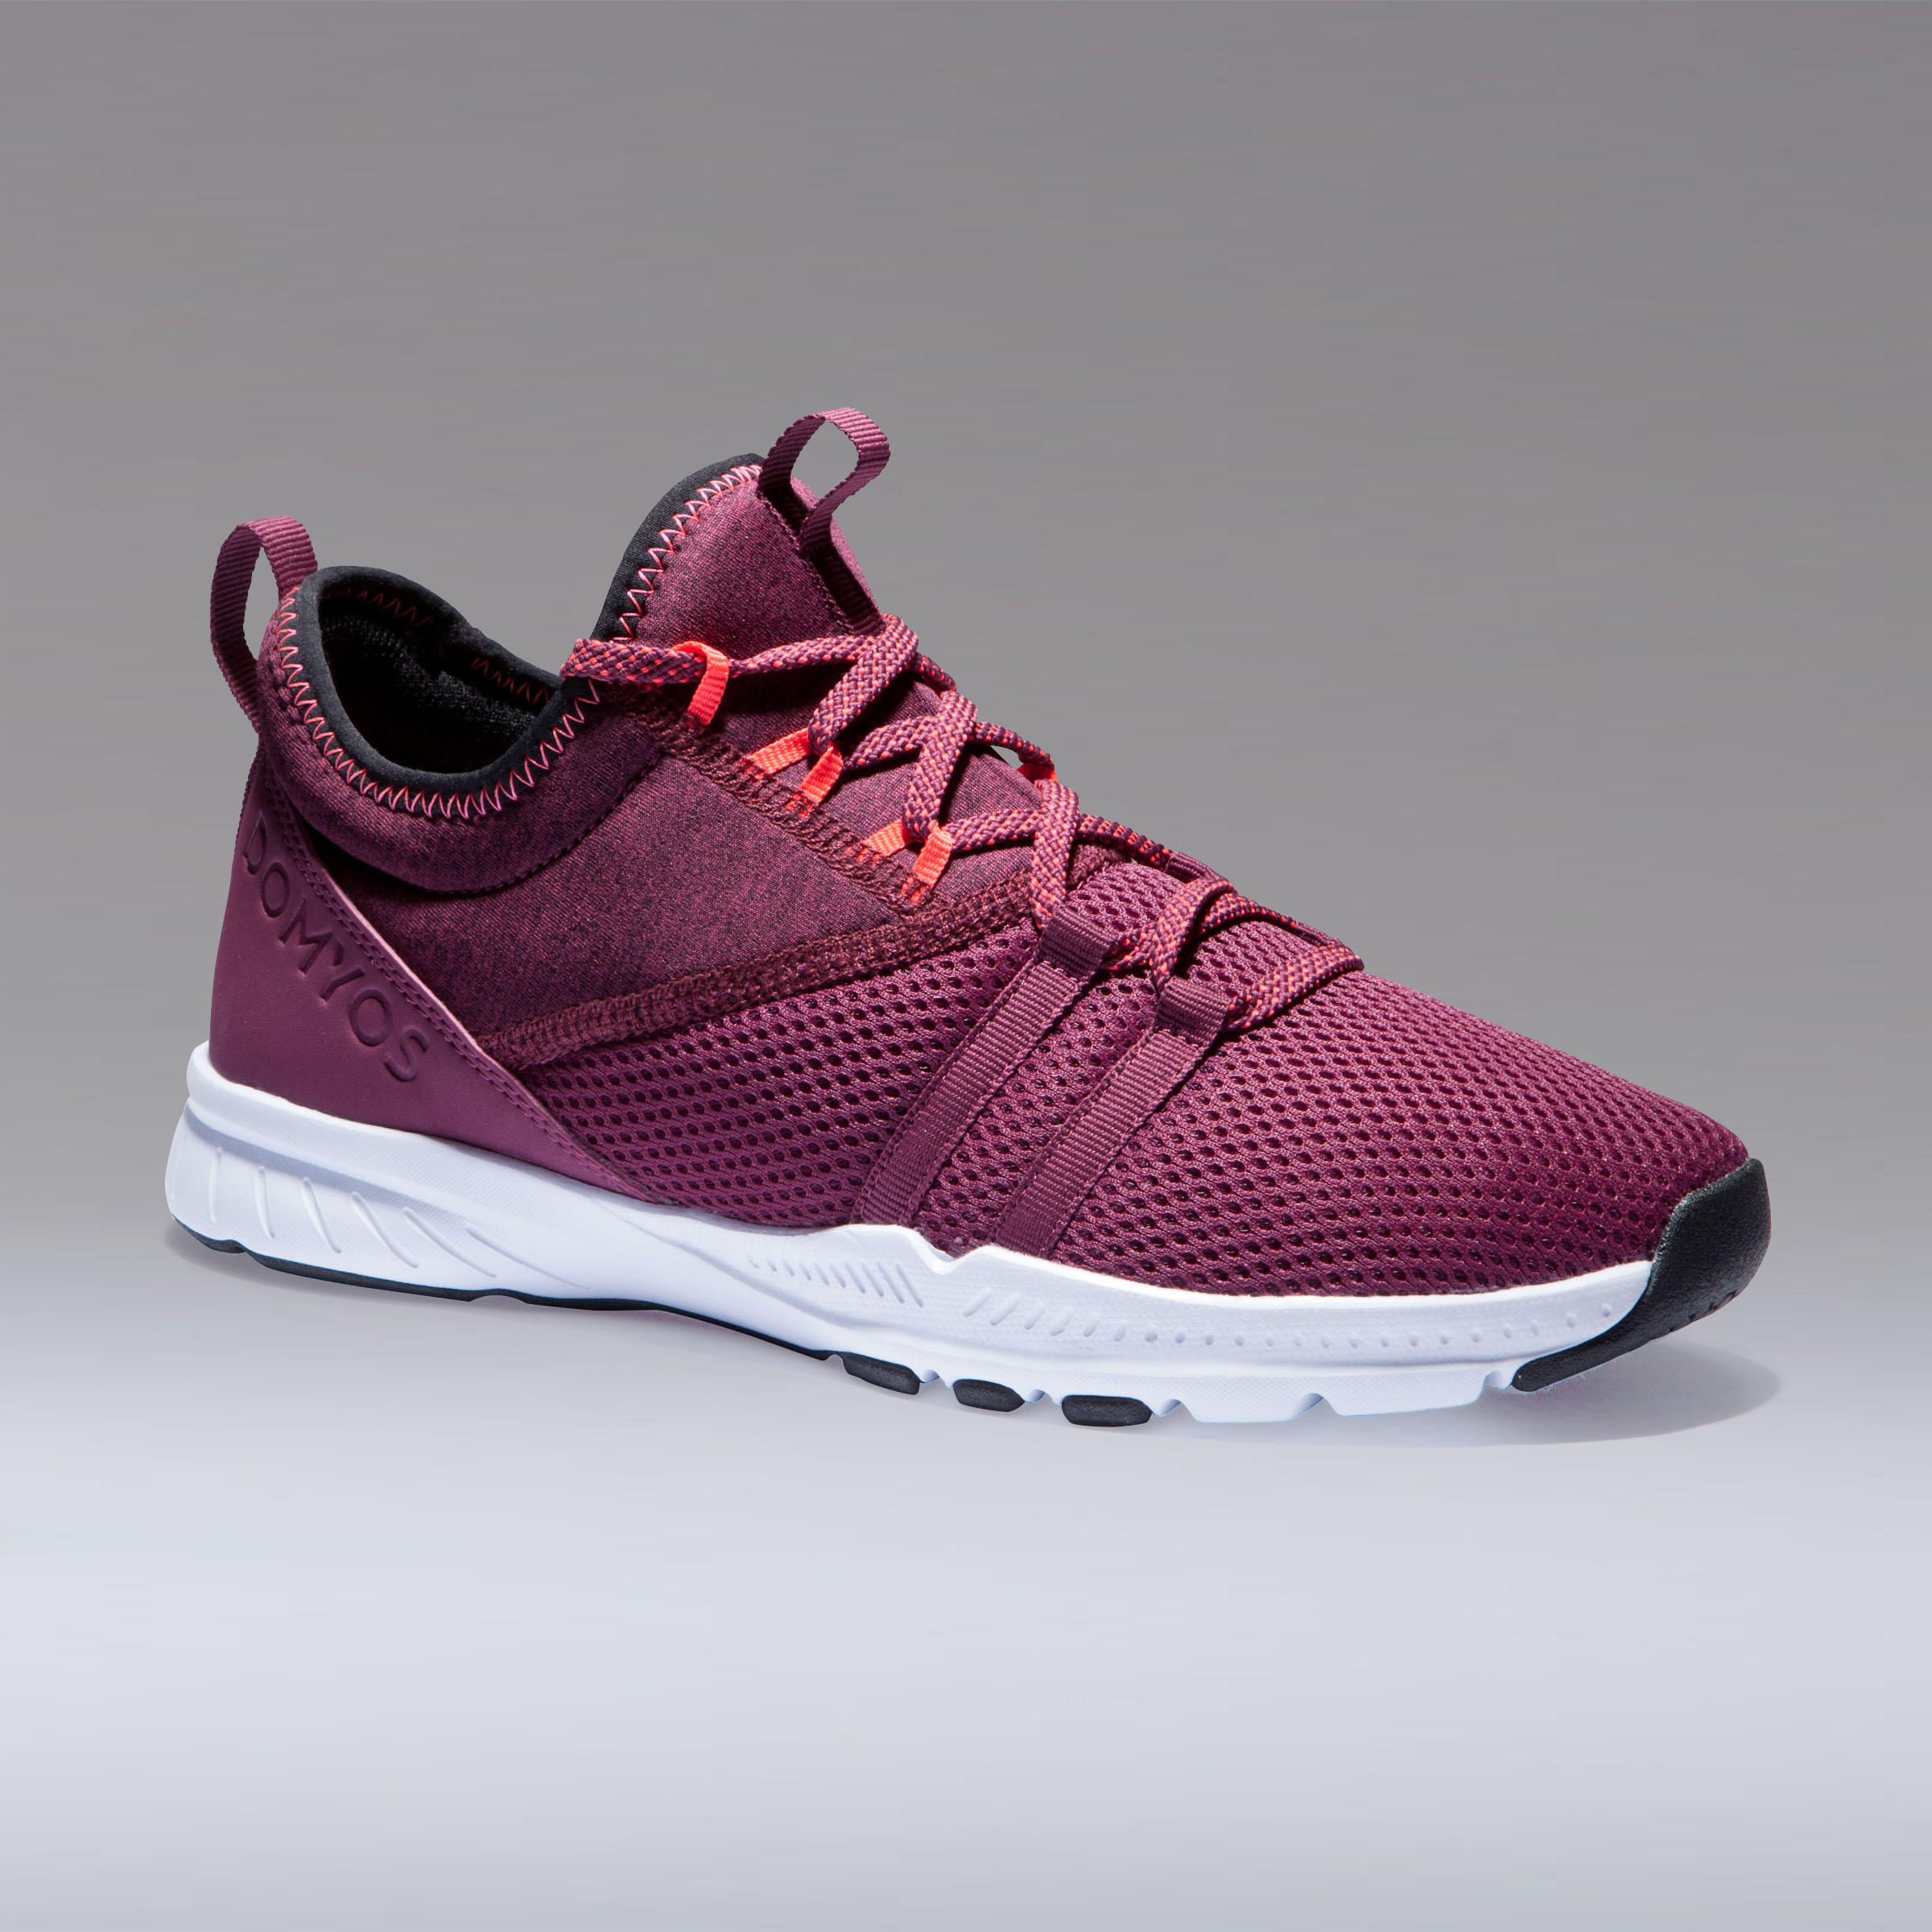 Women's Fitness Shoes 120 Mid - Burgundy 2/16